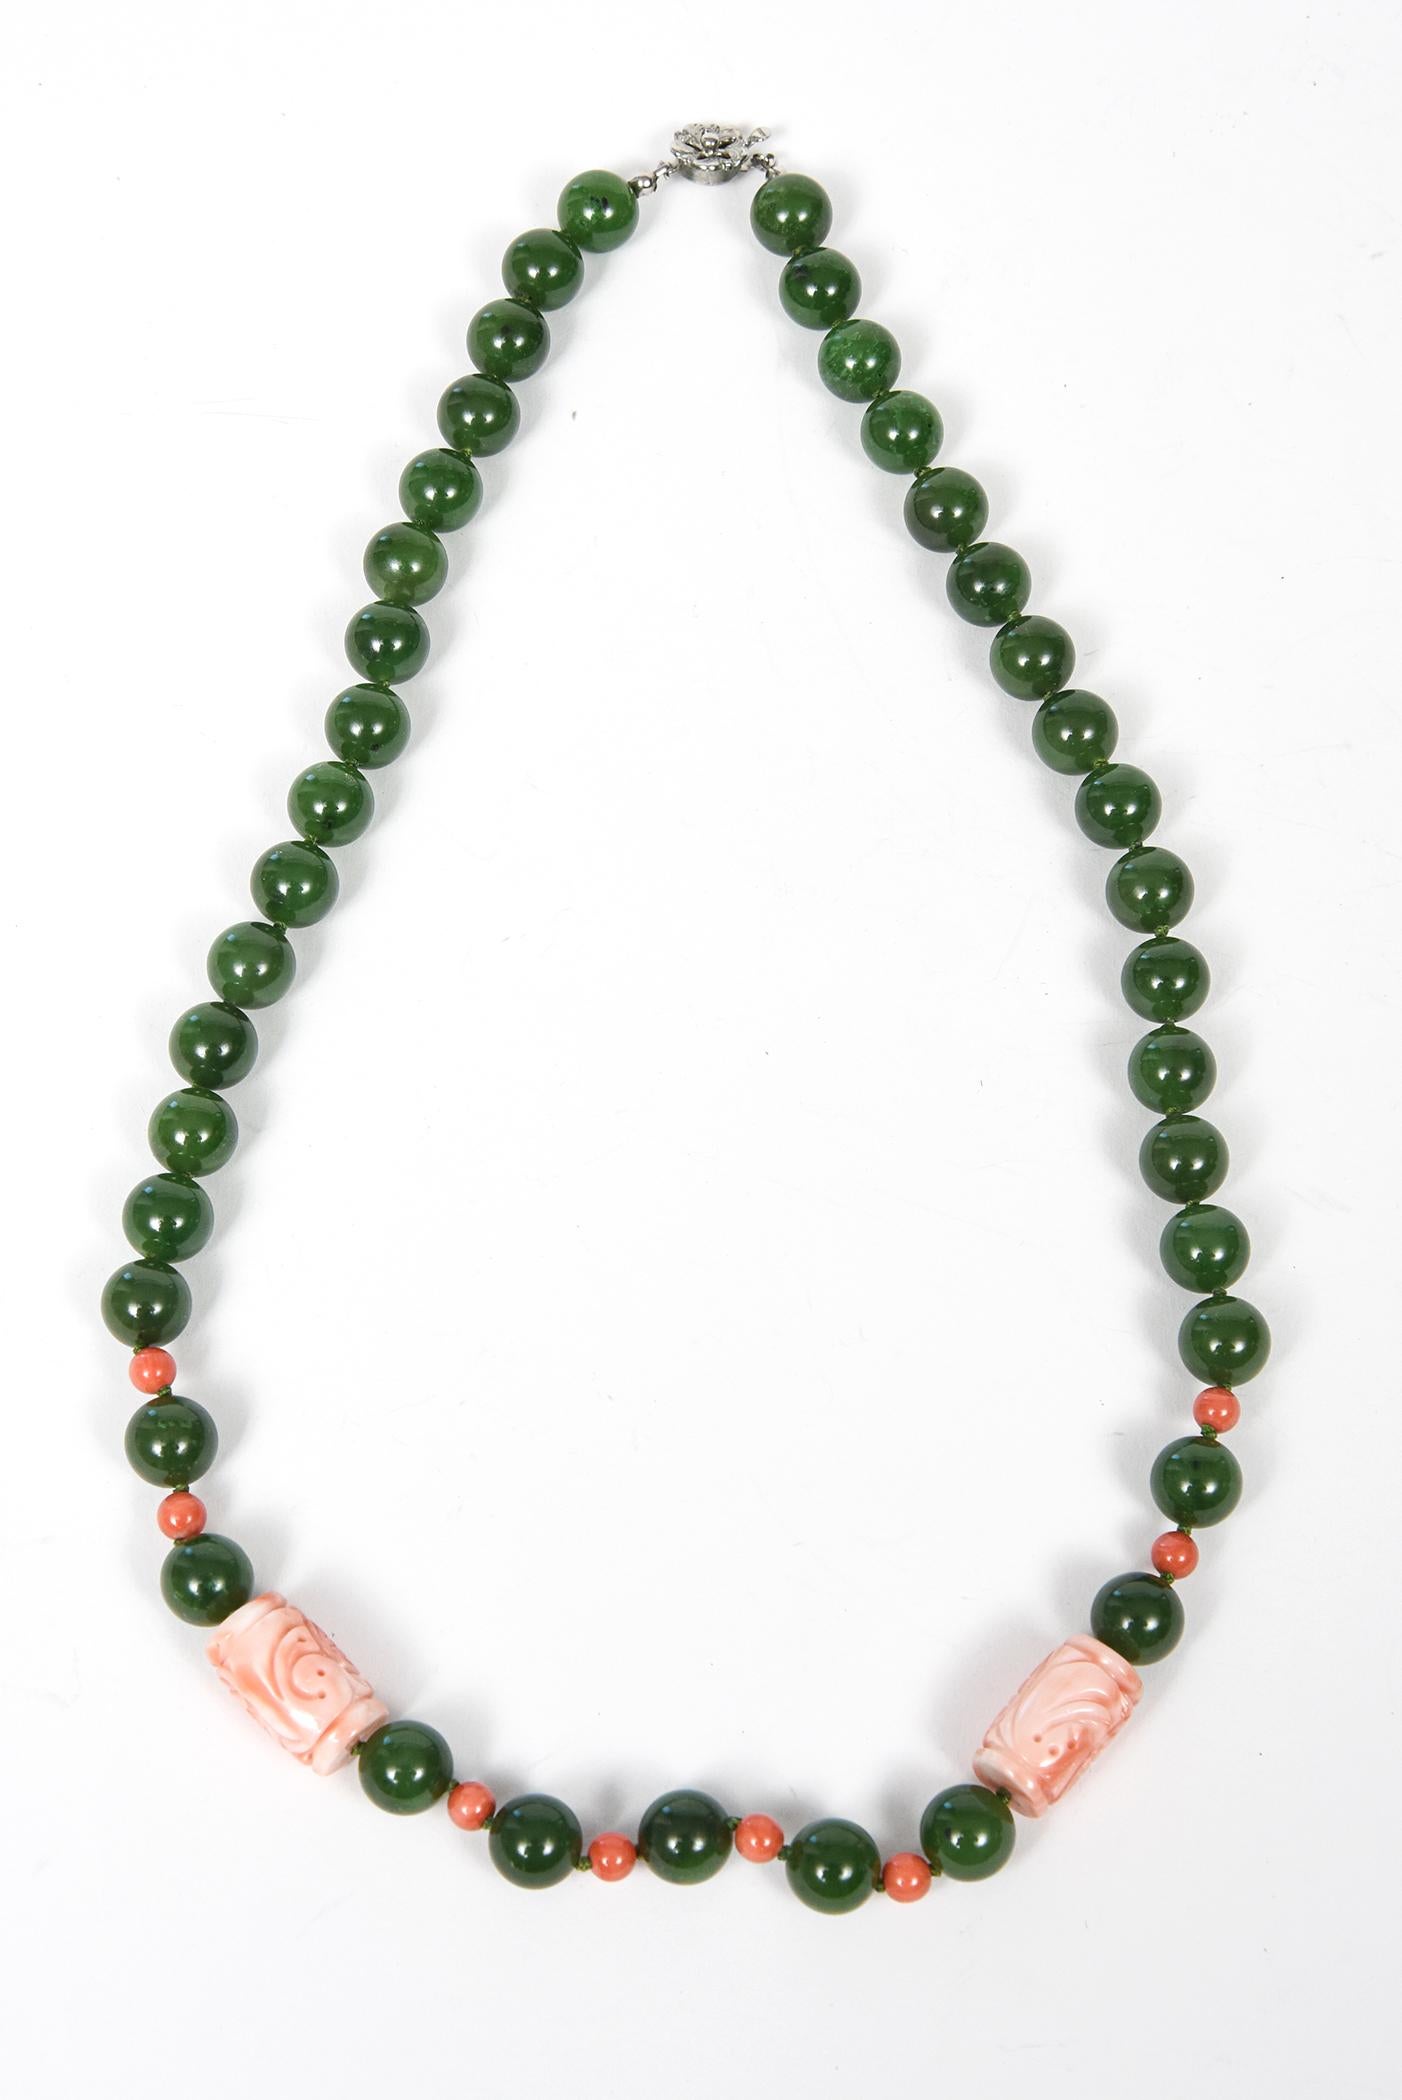 Mid 20th Century Chinese Jade and Carved Coral Bead Necklace With Silver Flower  In Good Condition For Sale In Miami Beach, FL